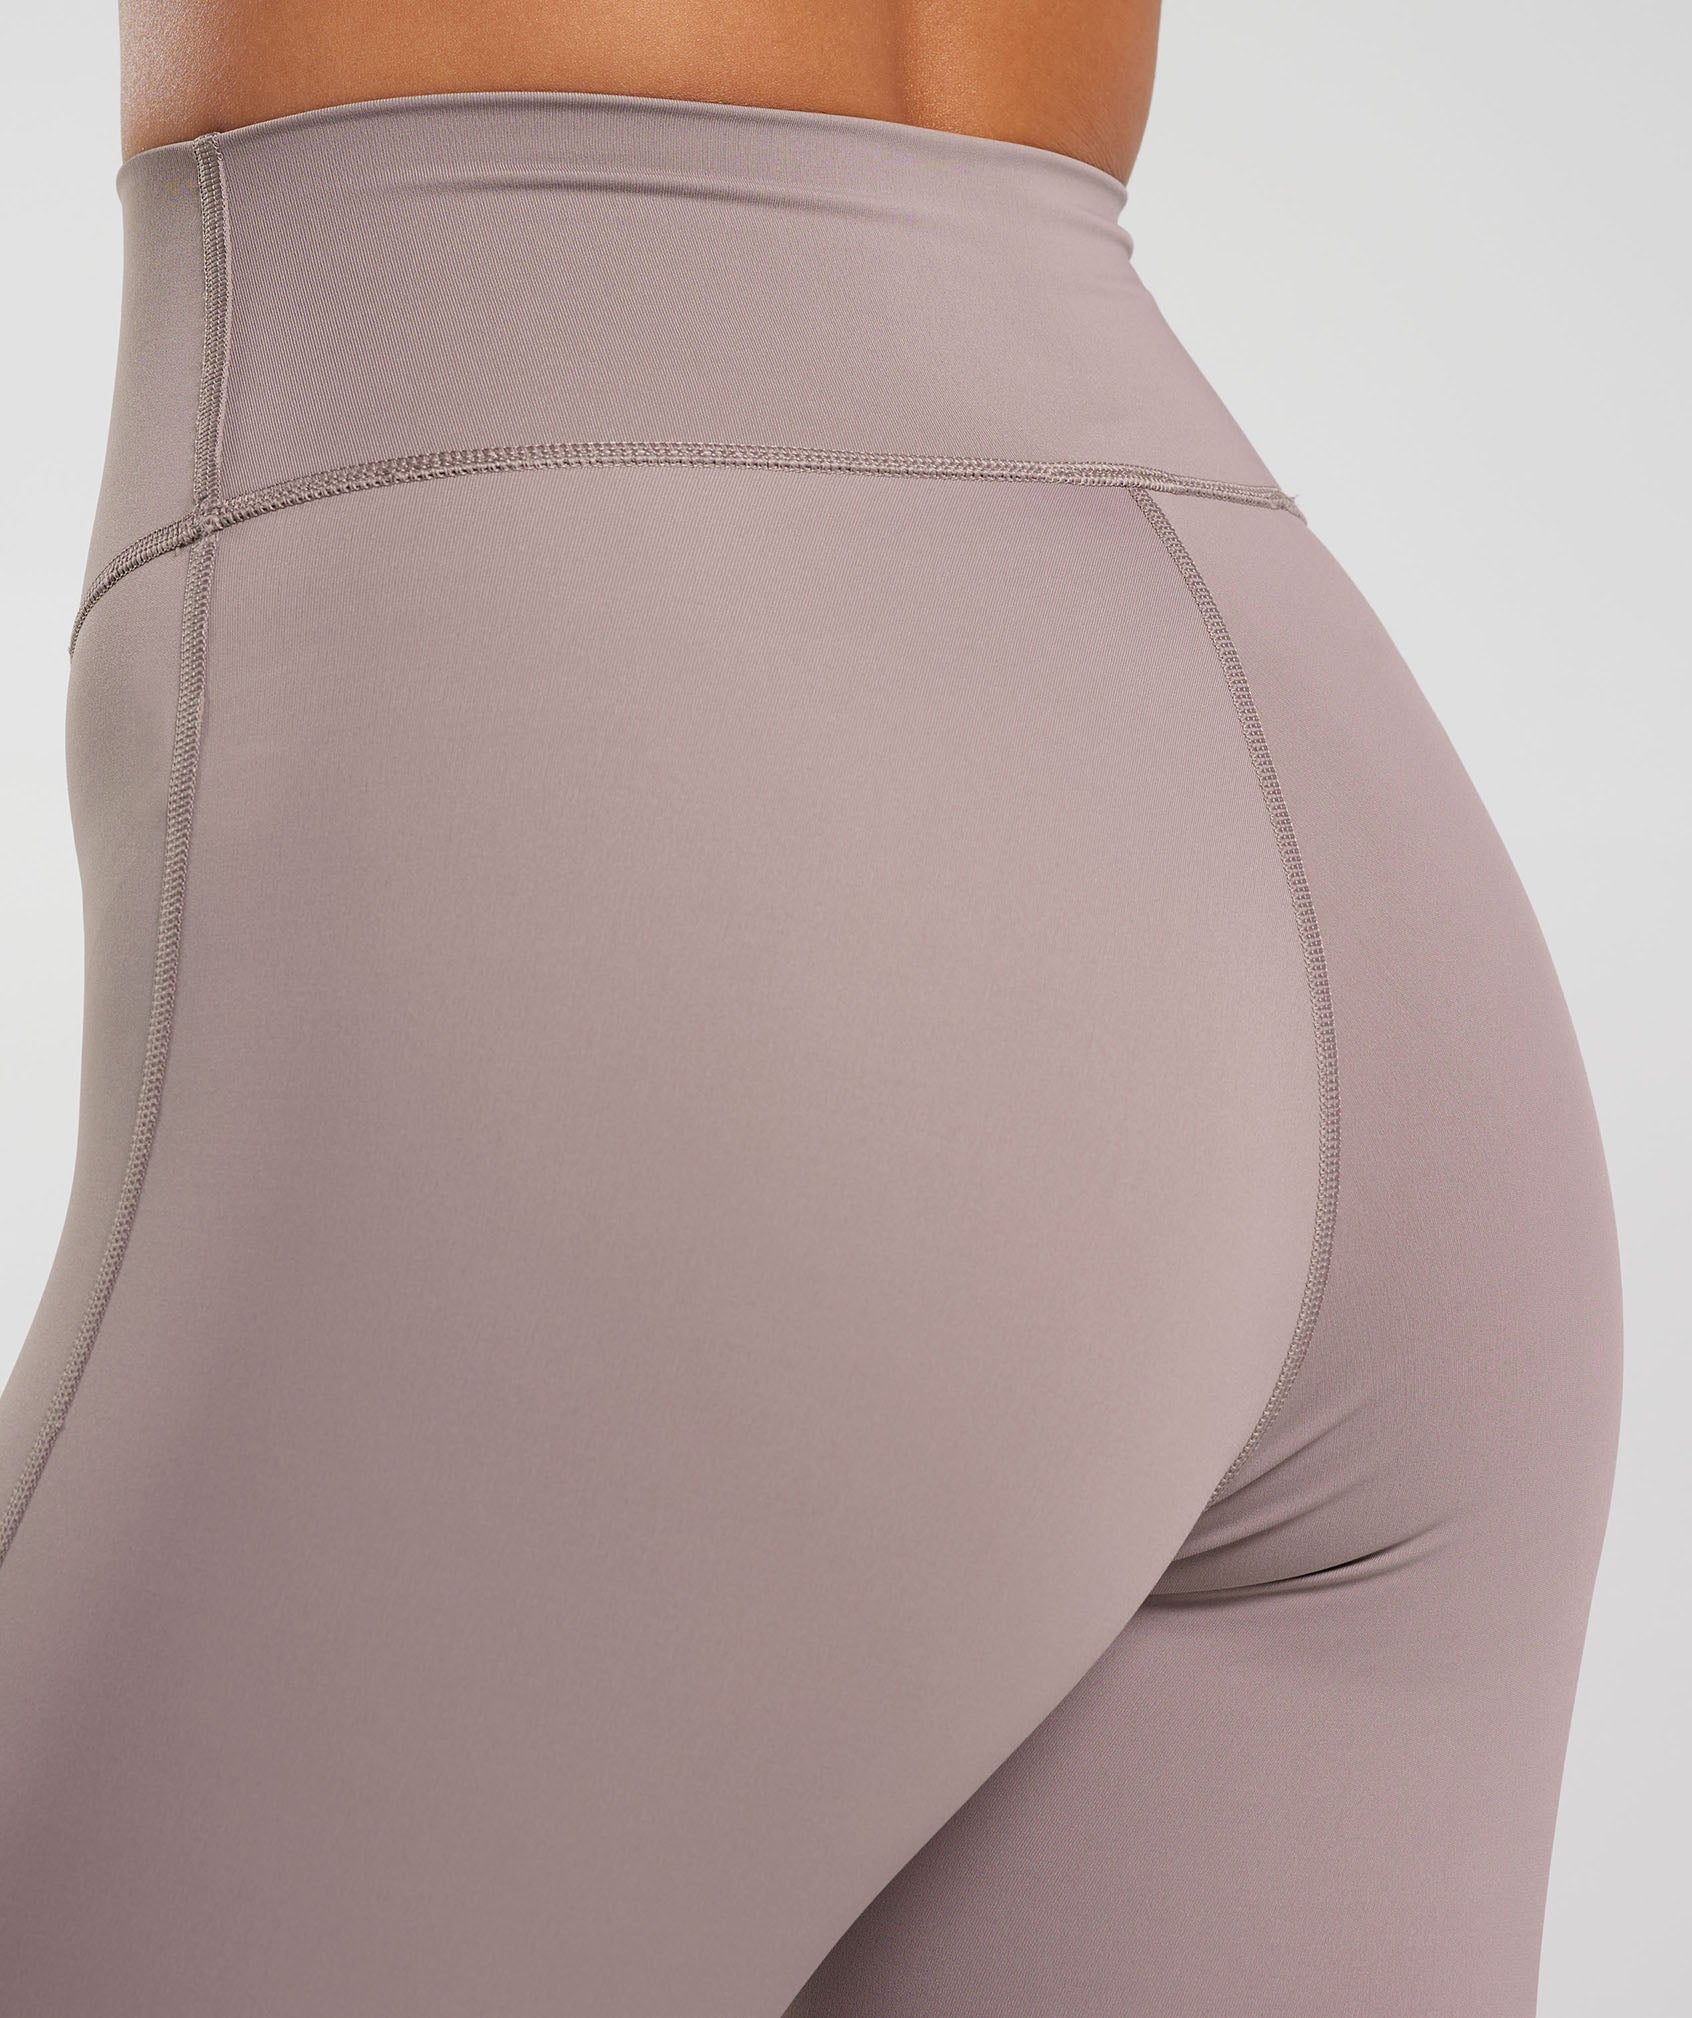 Elevate Leggings in Washed Mauve - view 6